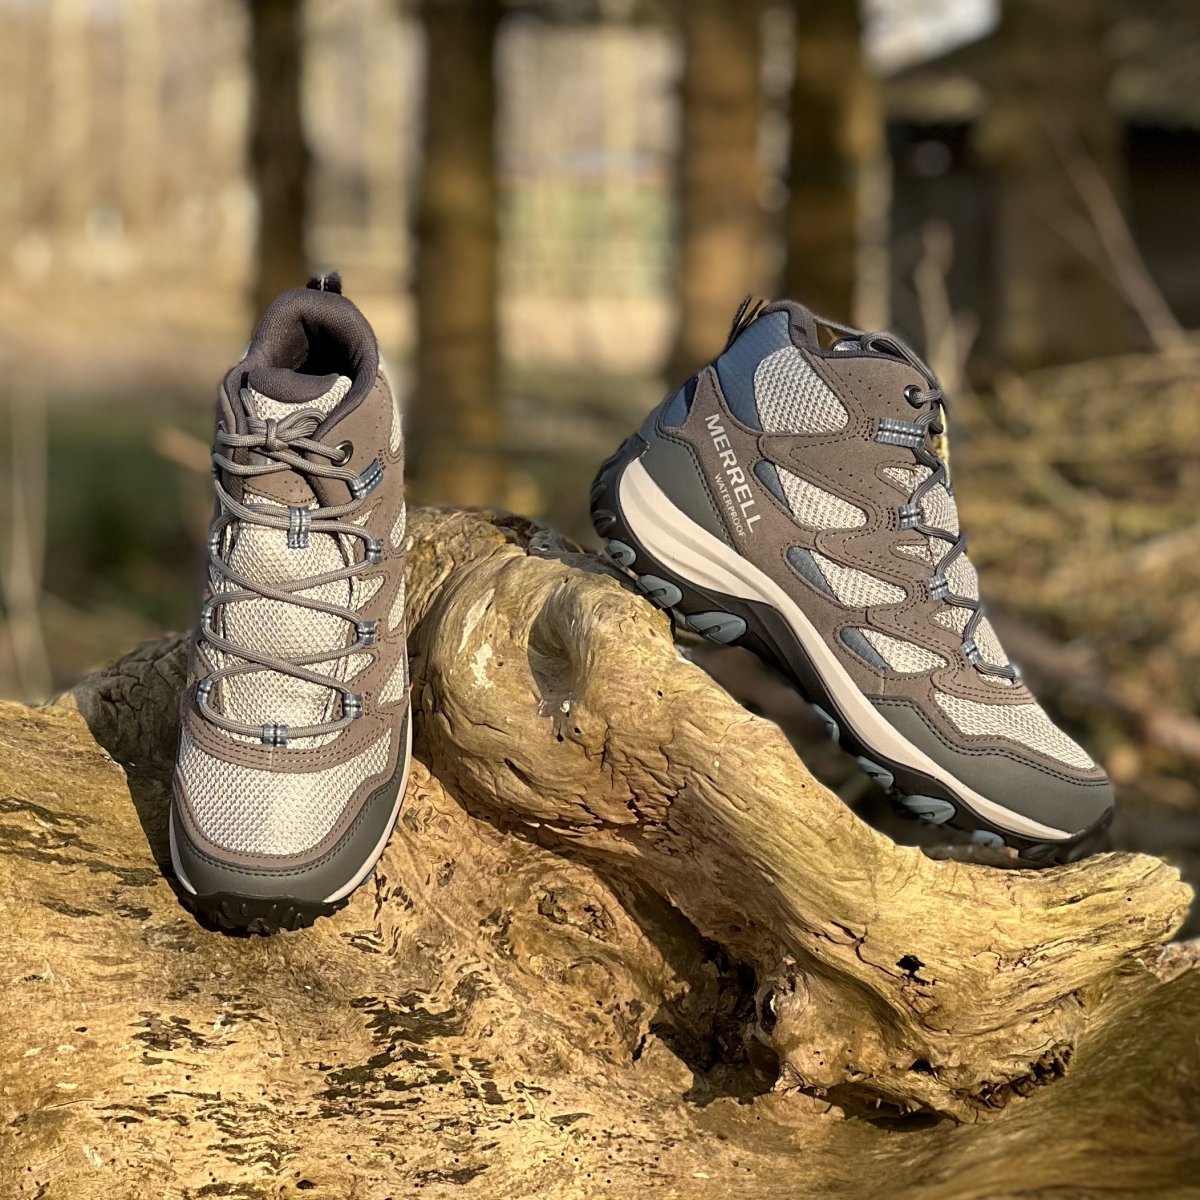 Merrell Rim Mid WP Charcoal Fodtøj - Outdoor By Nature